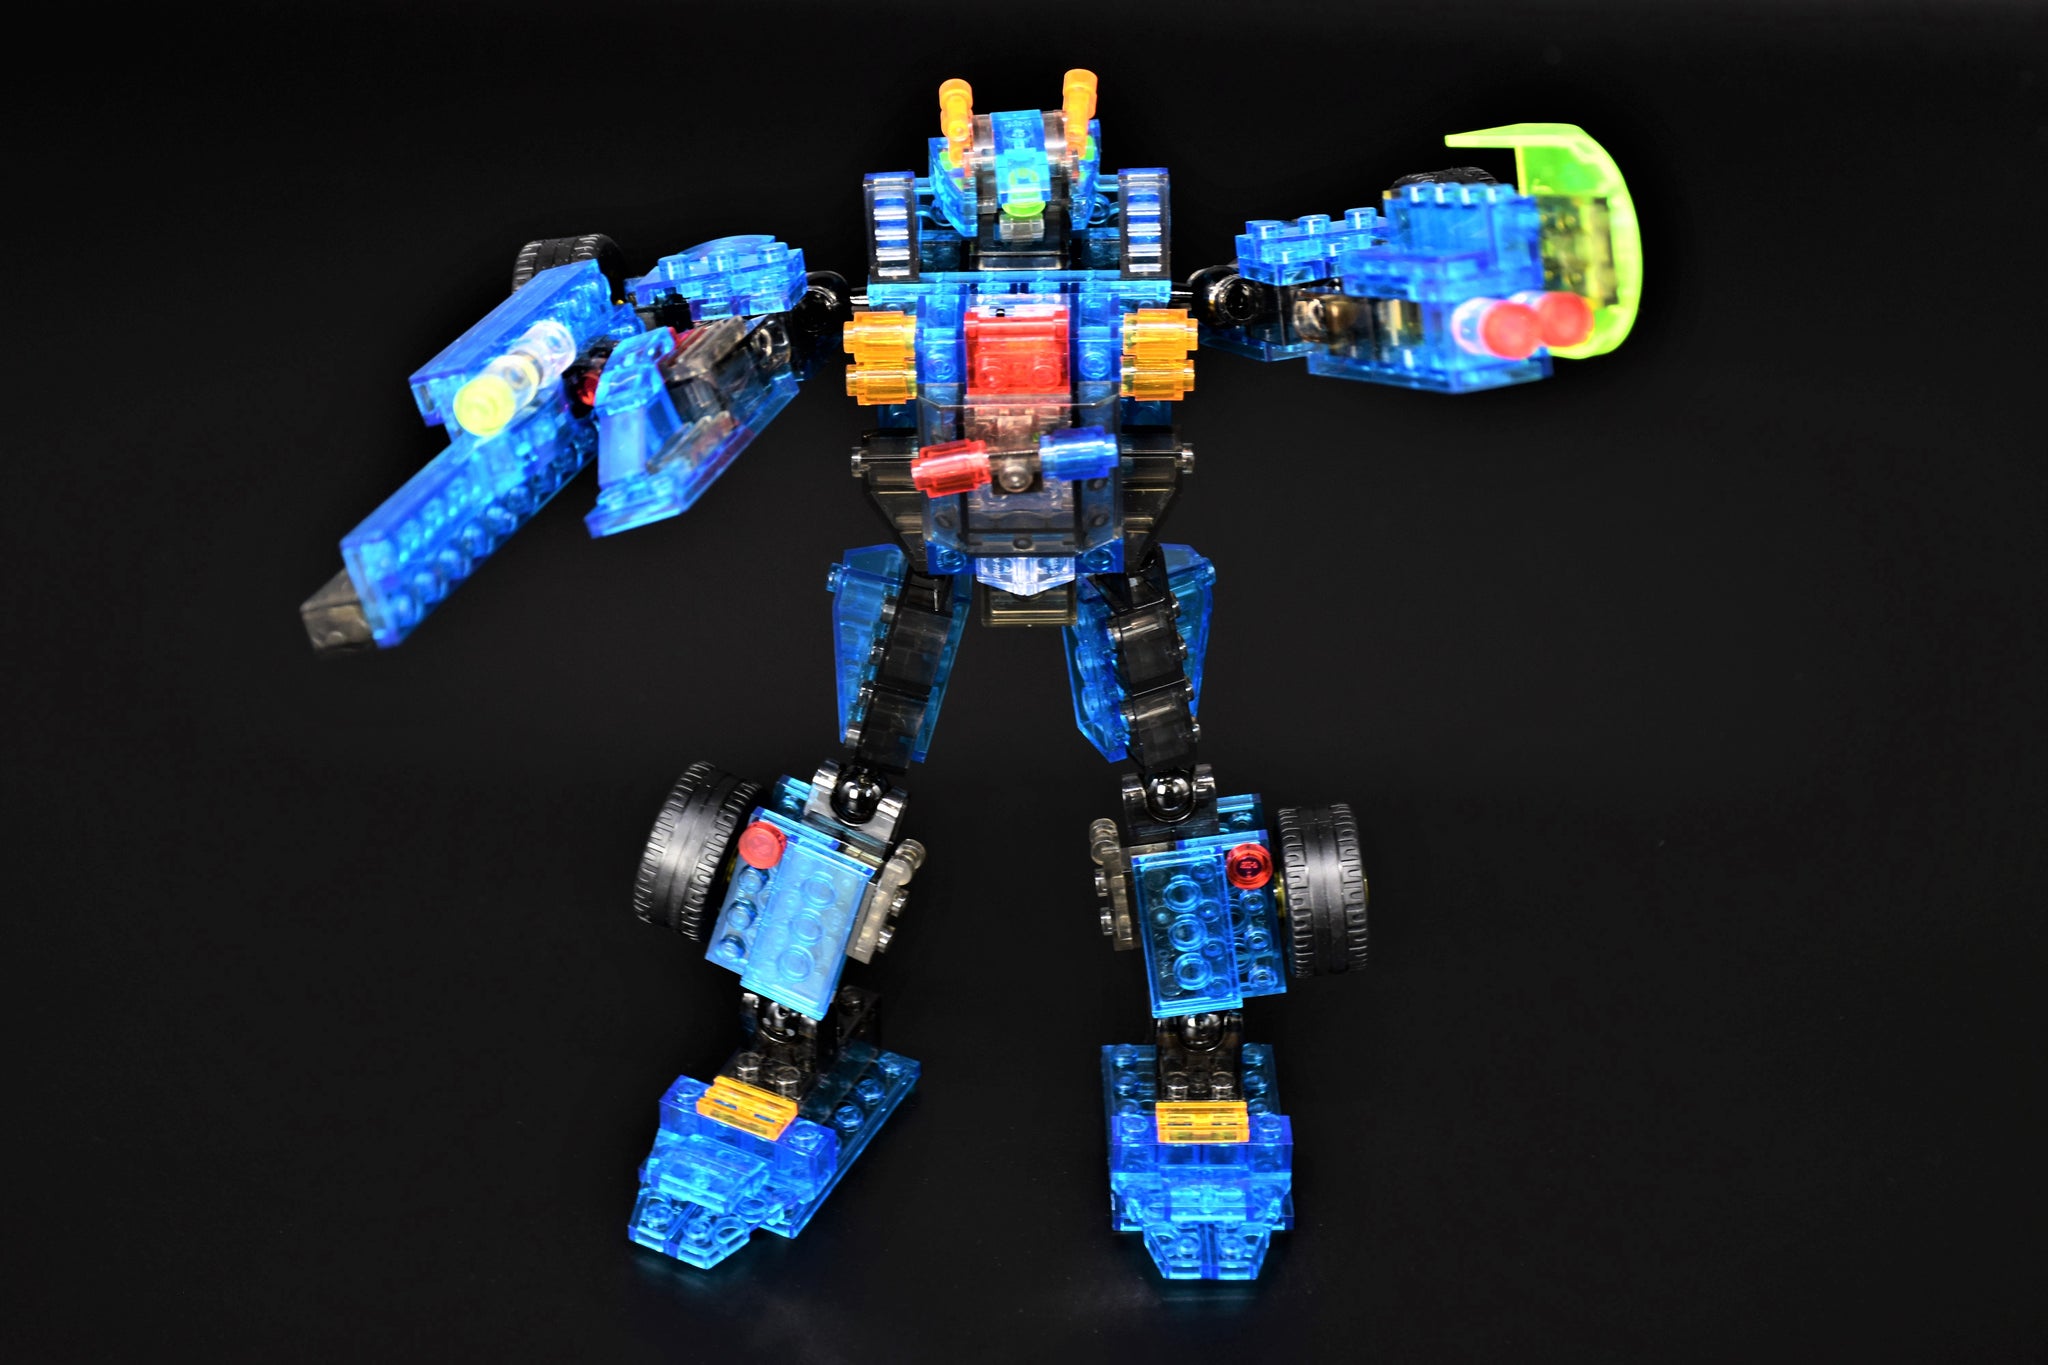 3-in-1 Police Robot Building Block Kit with Cool LED Light Boxes. Transformable Robot, Car, & Dinosaur. (Compatible with other bricks, 186 pieces)